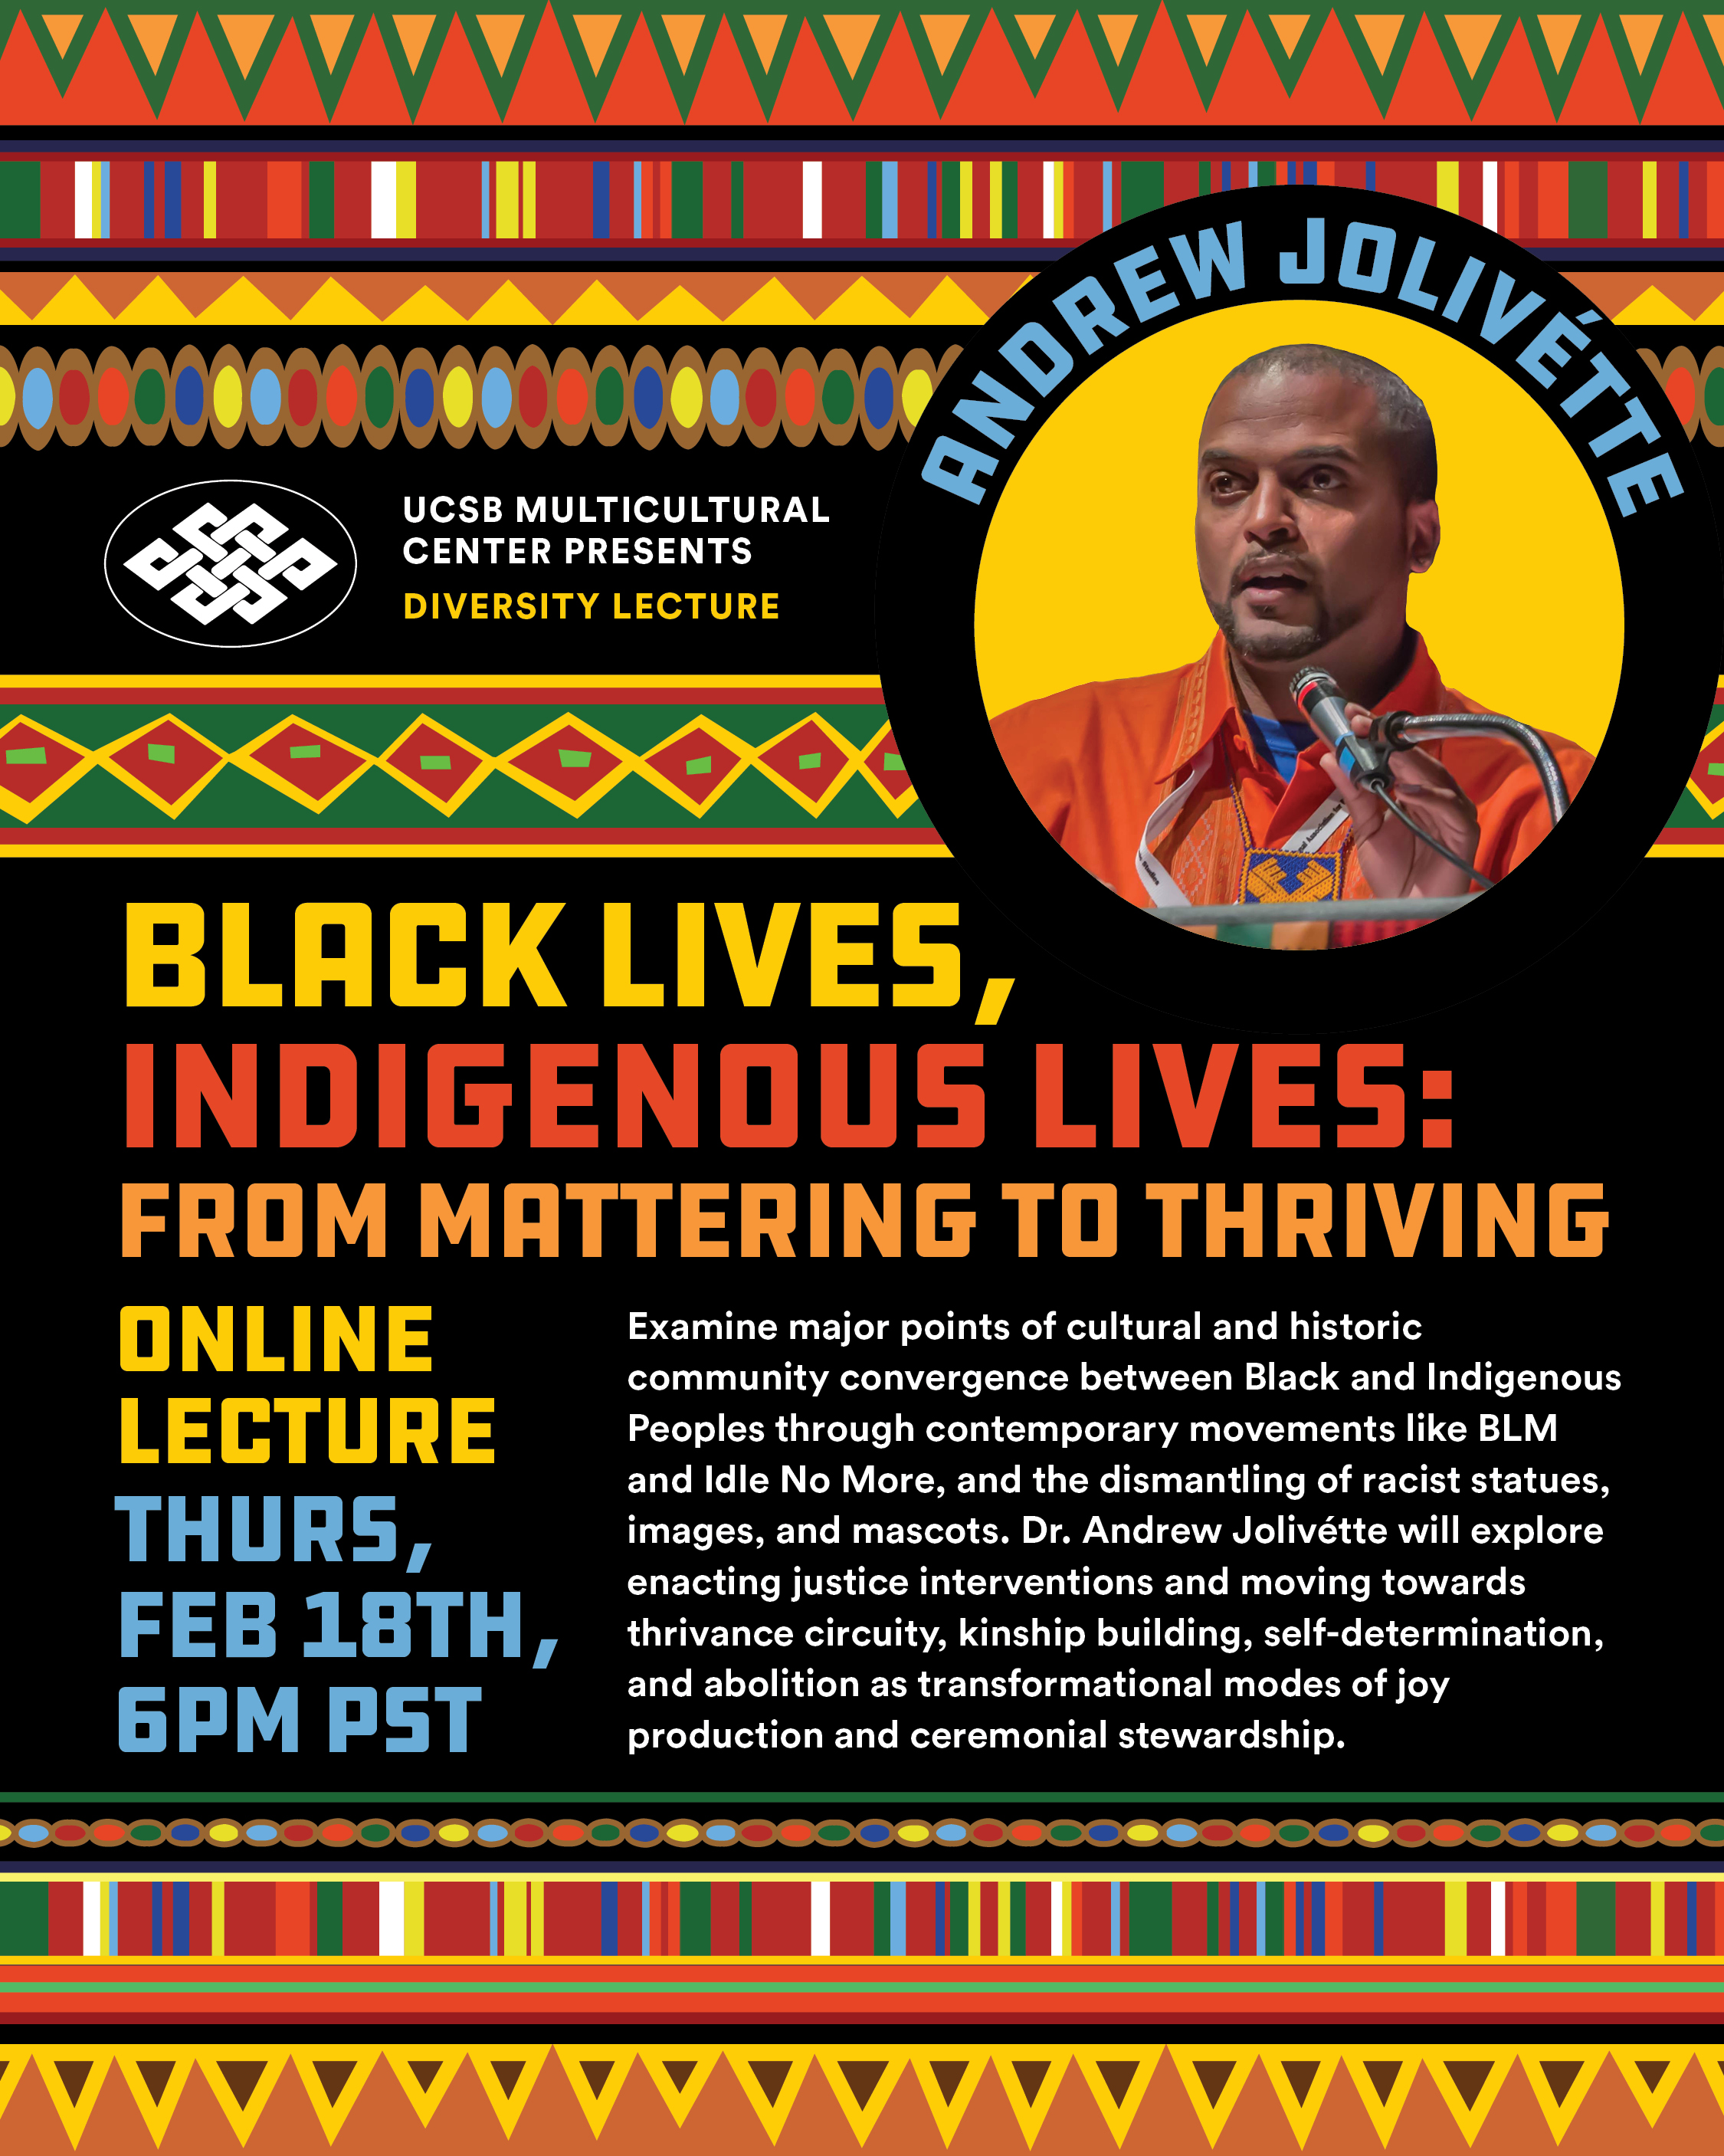 Black Lives, Indigenous Lives: From Mattering to Thriving with Andrew Jolivette